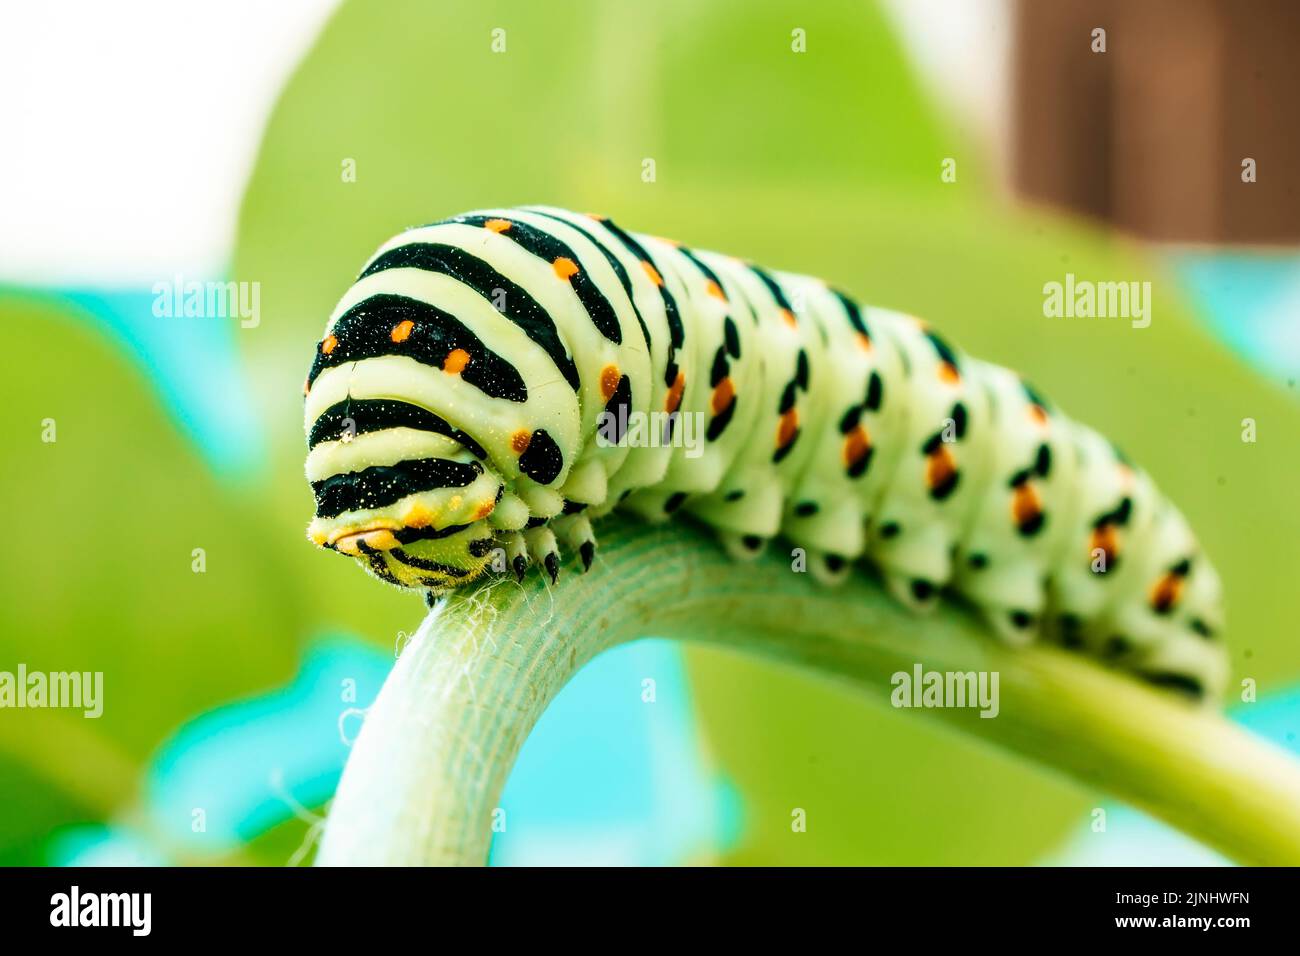 Caterpillar of swallowtail crawling on branch of dill. Macrophoto. Stock Photo